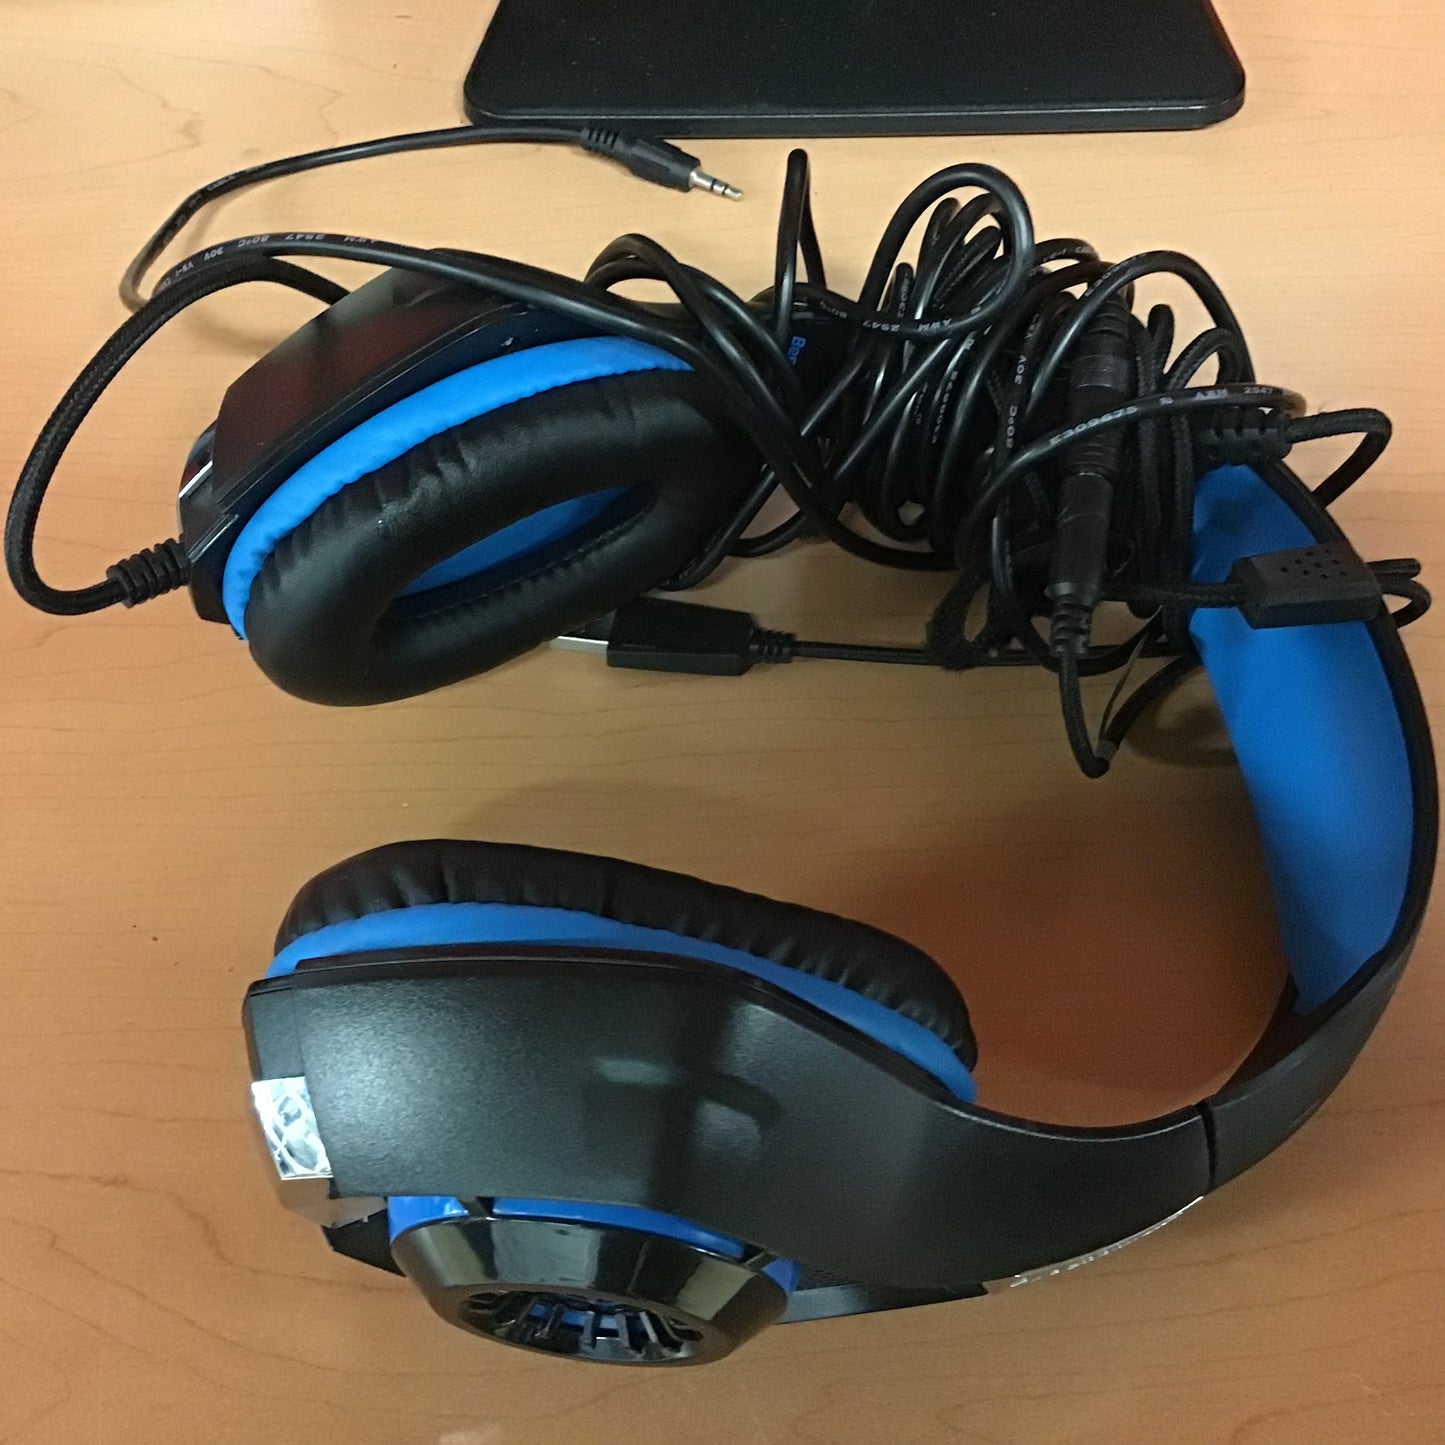 Beexcellent Gaming Headphone with Mic